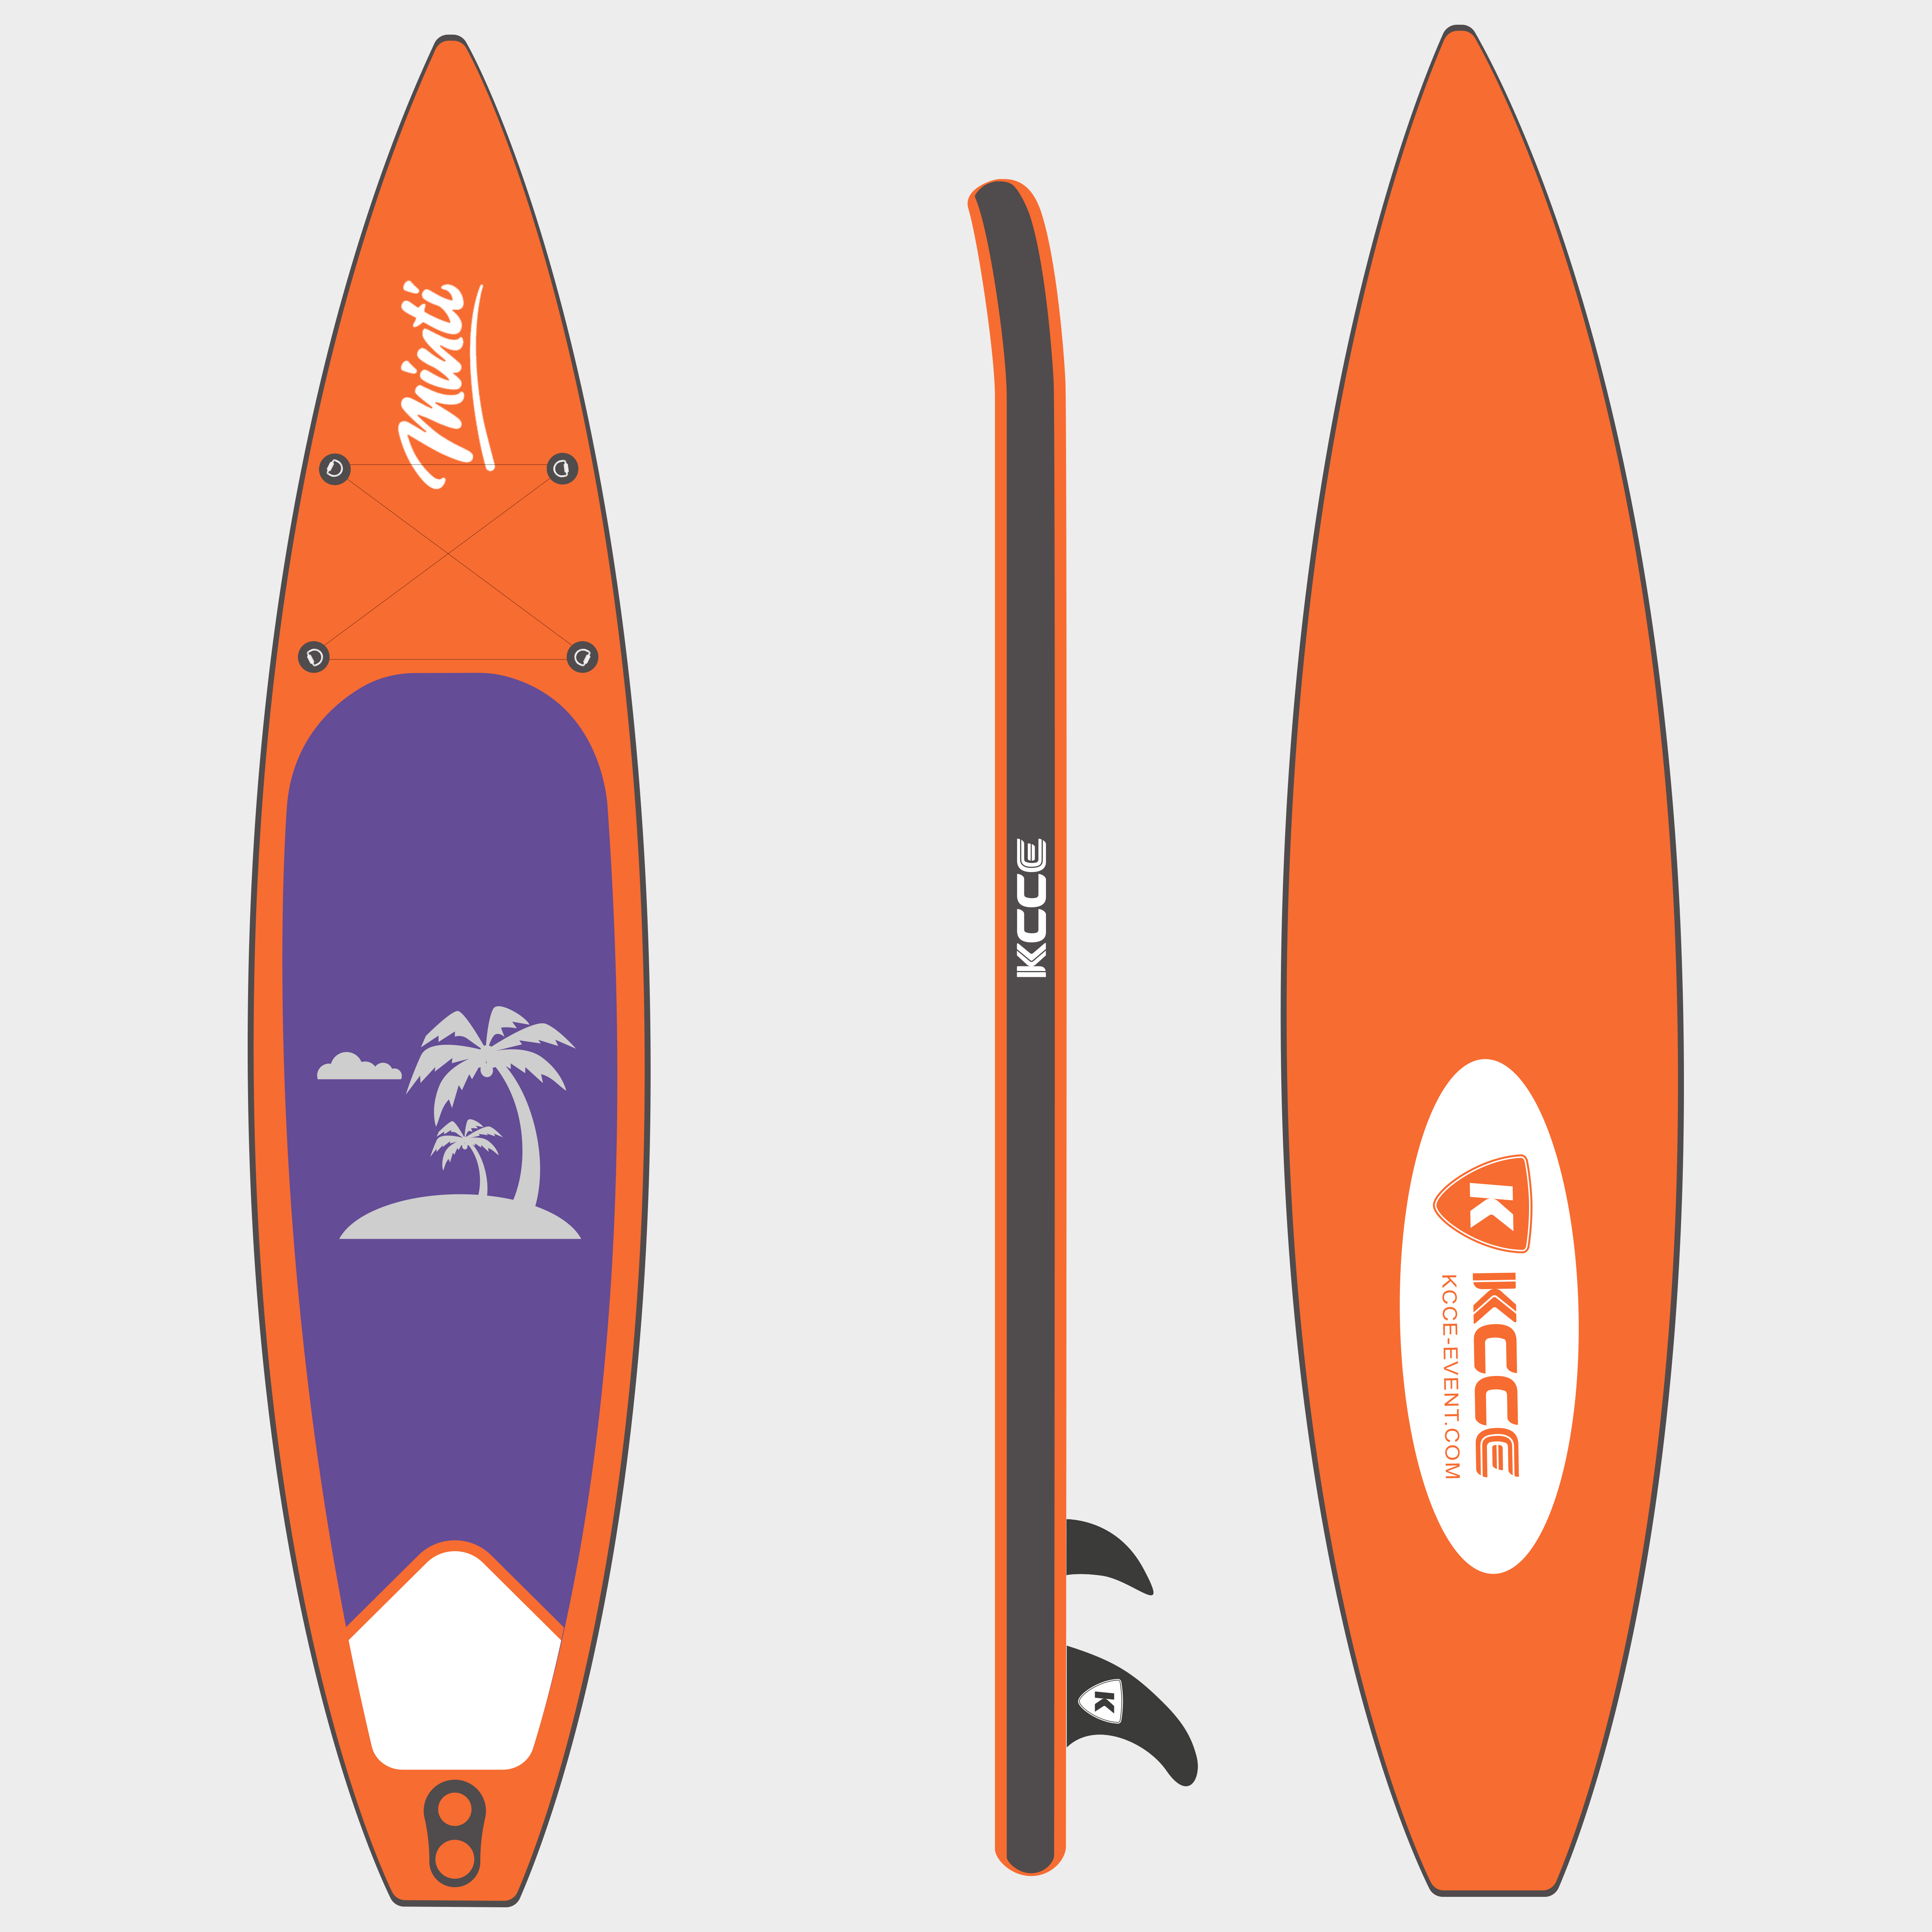 Close to Nature and Far Away from Crowded People contact Entertainment Rowing Inflatable Stand Up PaddleSurfing Boards